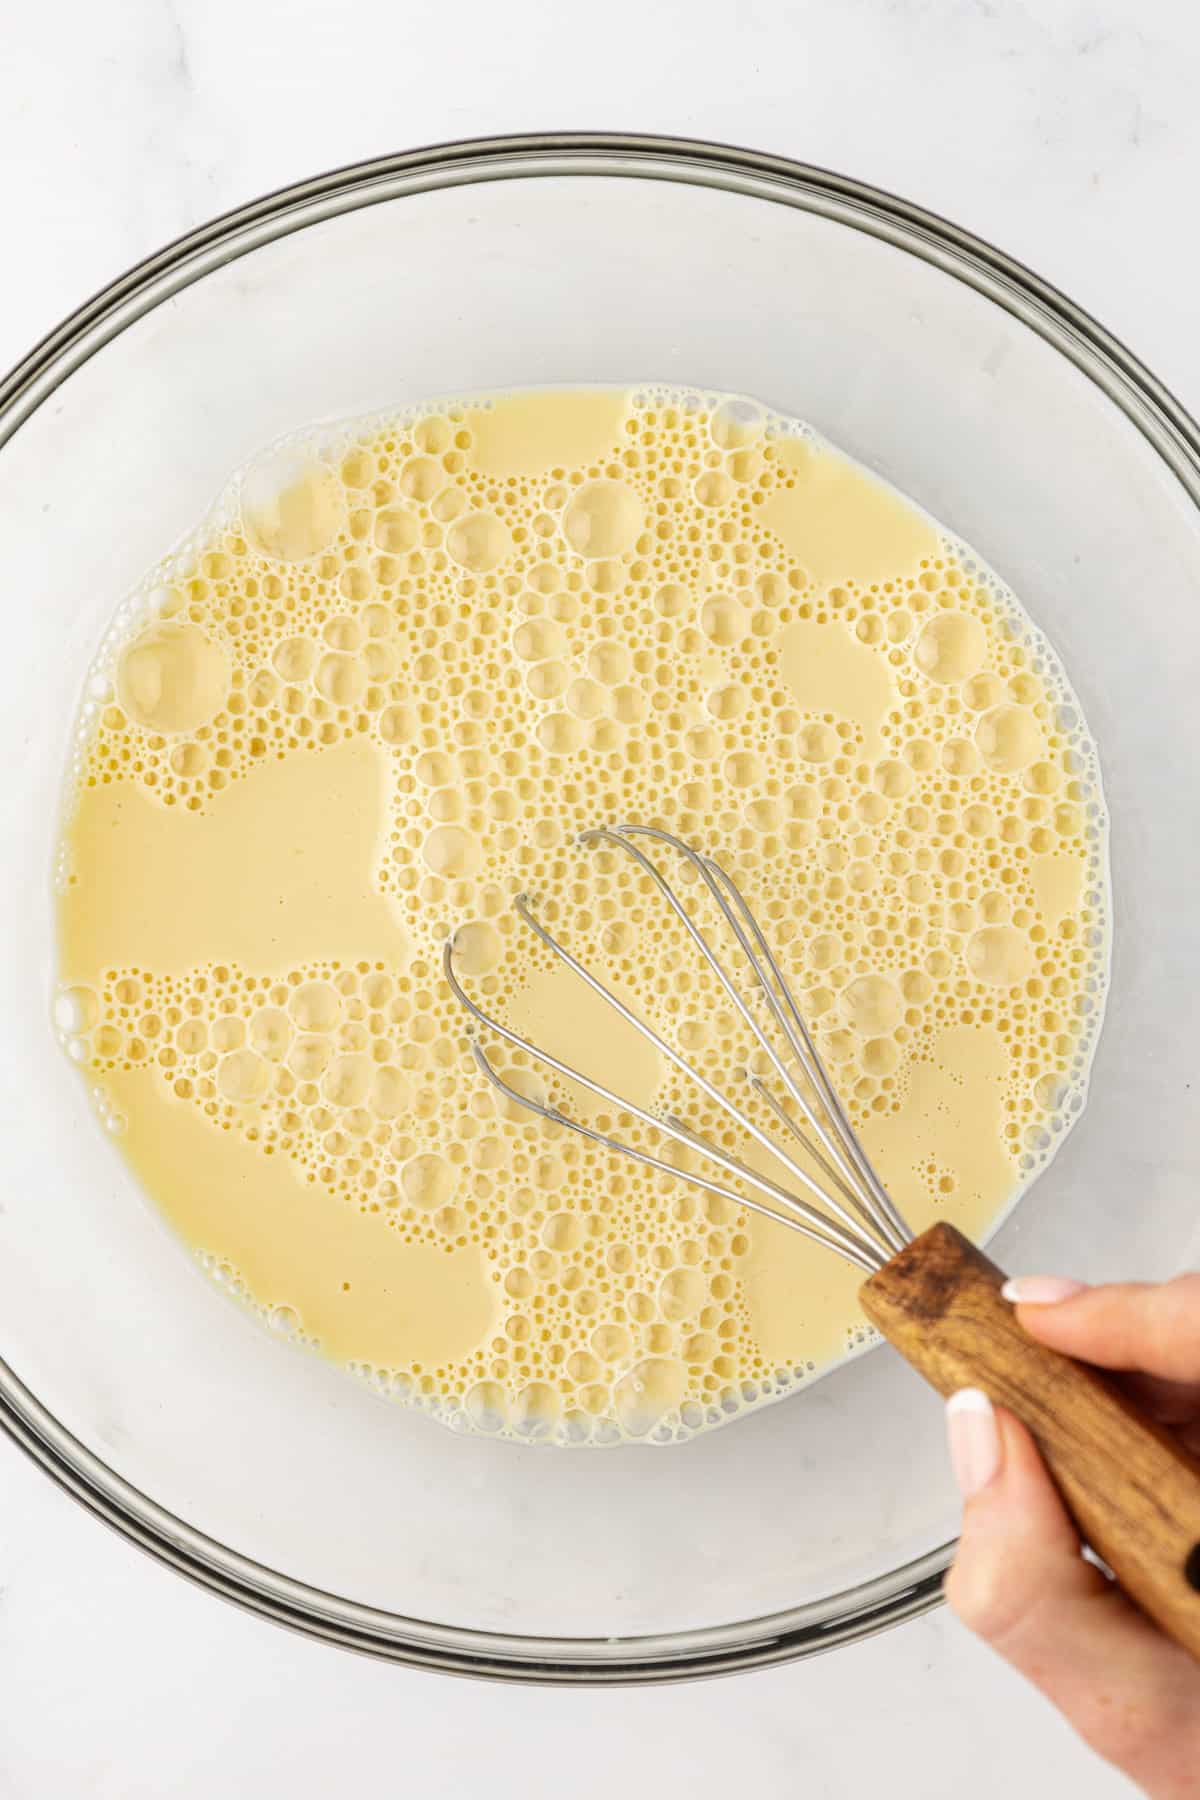 wet ingredients for funnel cake batter being whisked in a clear glass bowl